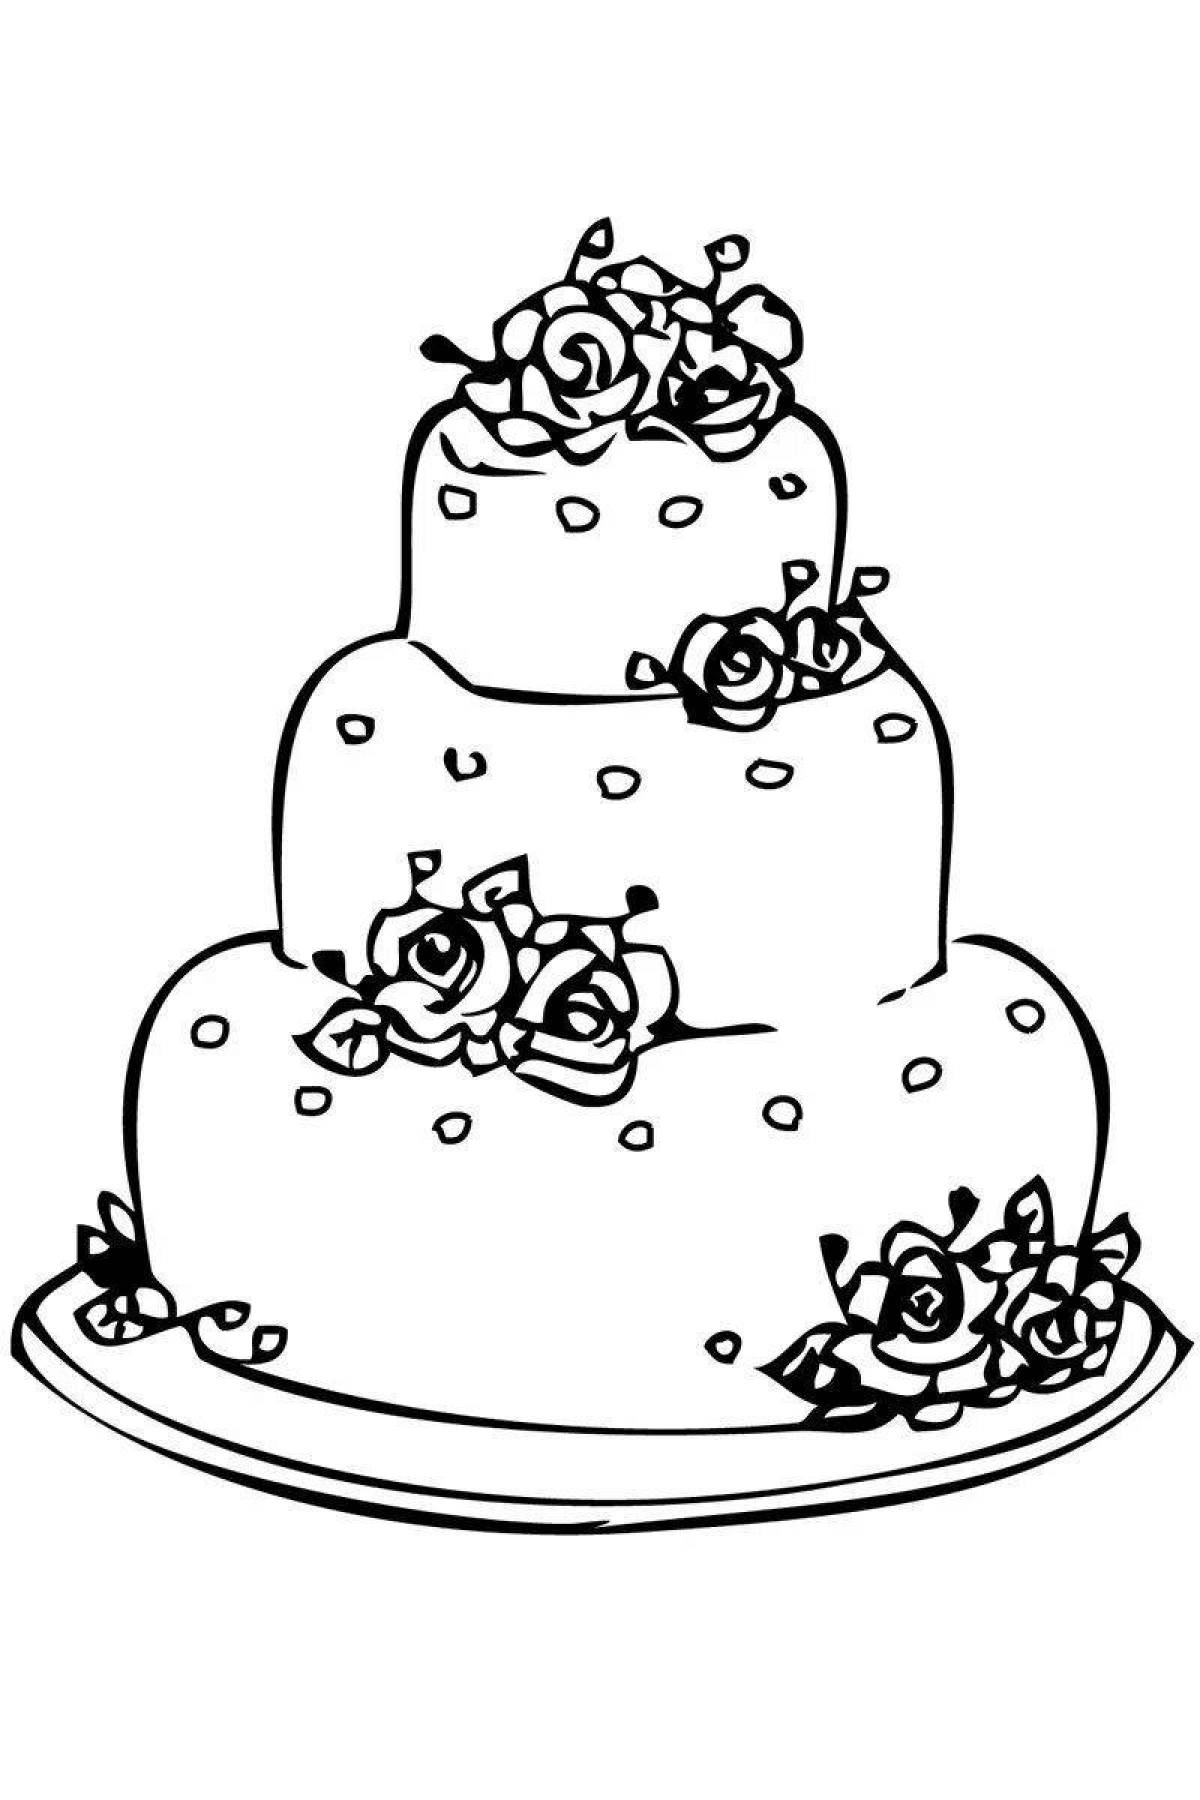 Delightful beautiful cake coloring page